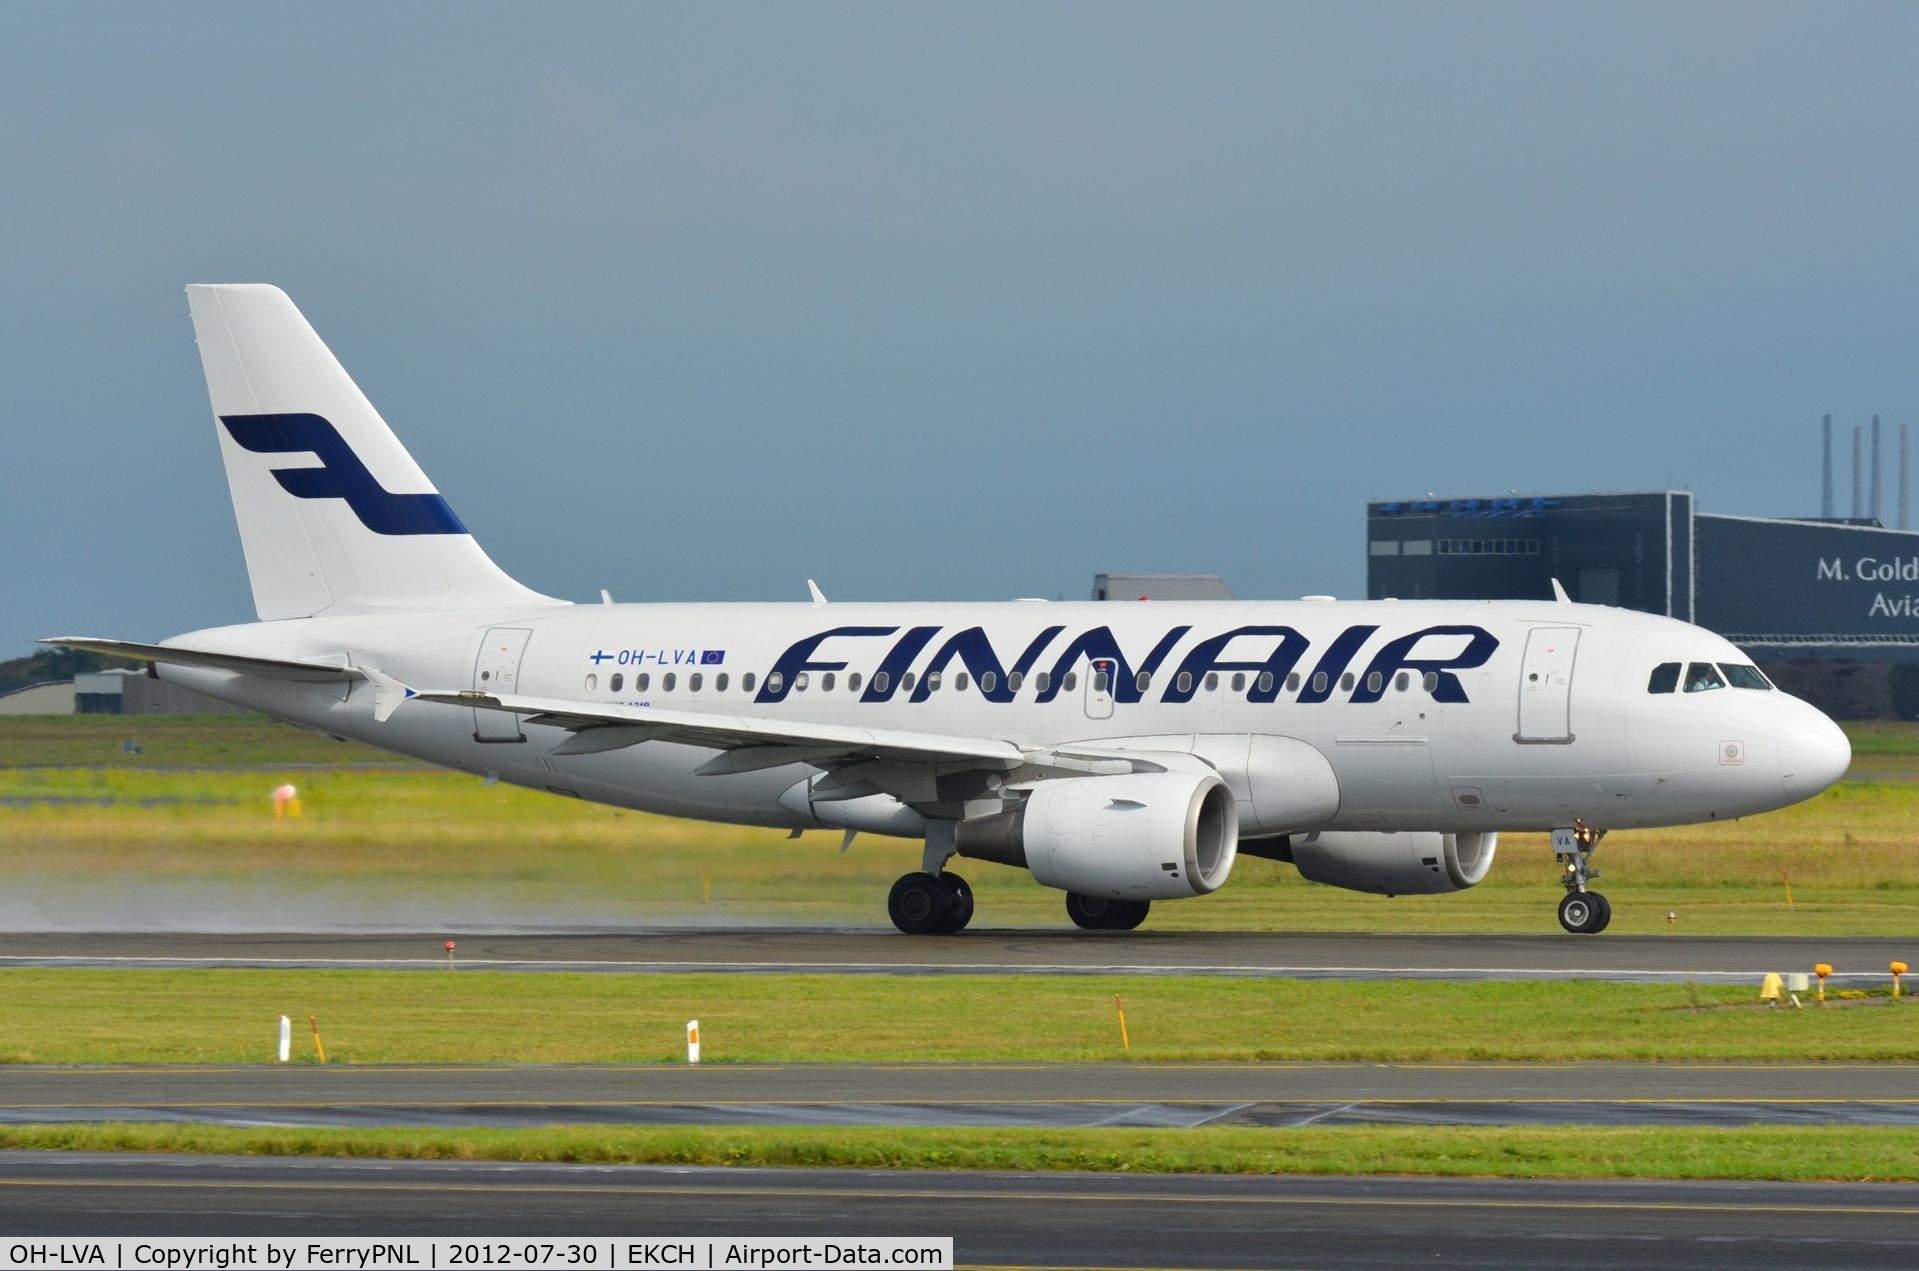 OH-LVA, 1999 Airbus A319-112 C/N 1073, Finair A319 for a short hop to Finland